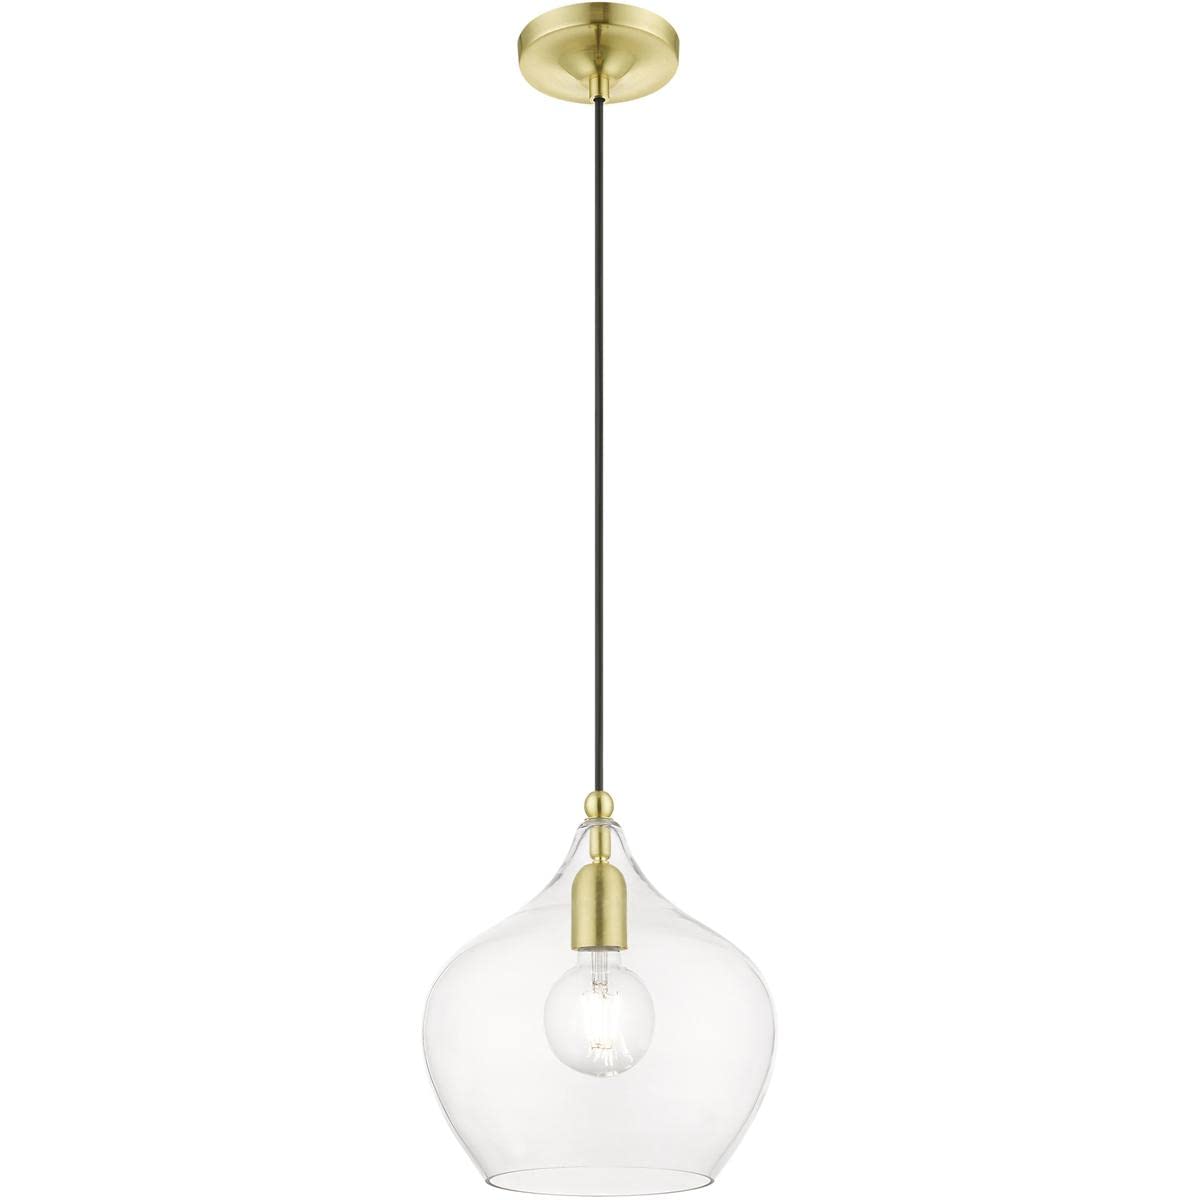 Livex Lighting 49093-12 Aldrich - 1 Light Pendant In Transitional Style-17 Inches Tall and 9.75 Inches Wide, Aldrich - 1 Light Pendant In Transitional Style-17 Inches Tall and 9.75 Inches Wide